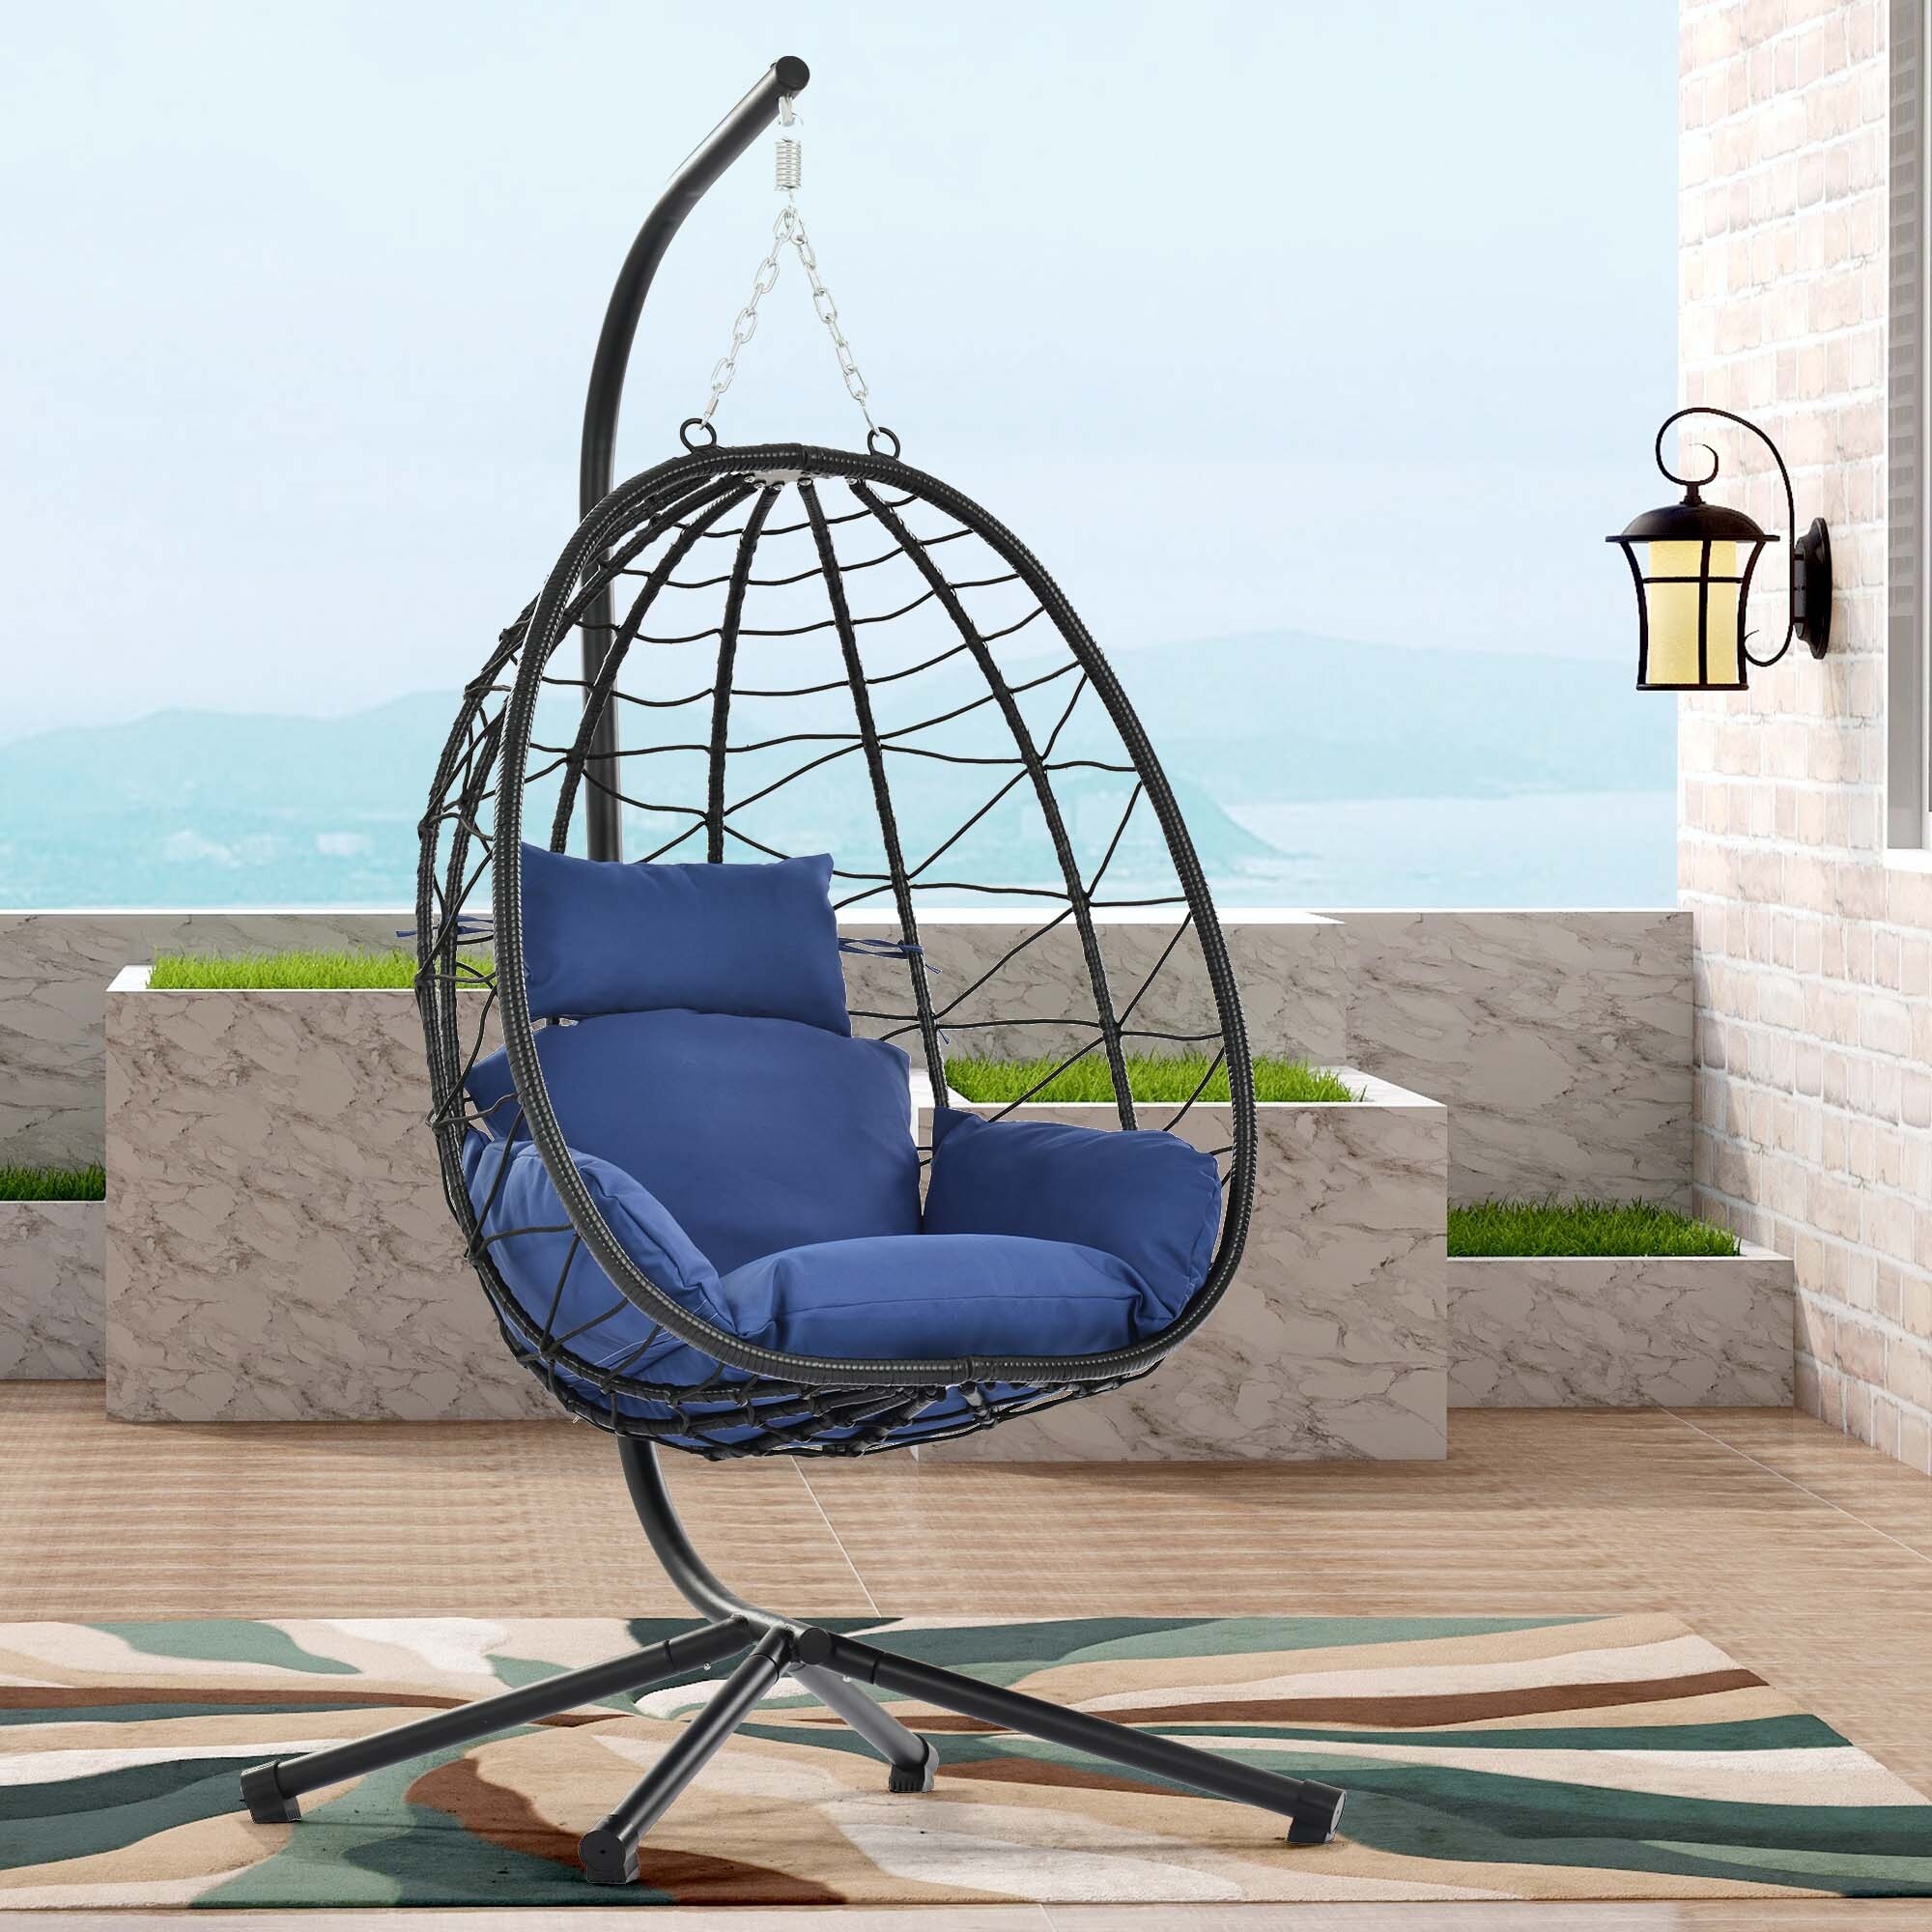 Steel Outdoor Hanging Chairs - Bed Bath & Beyond